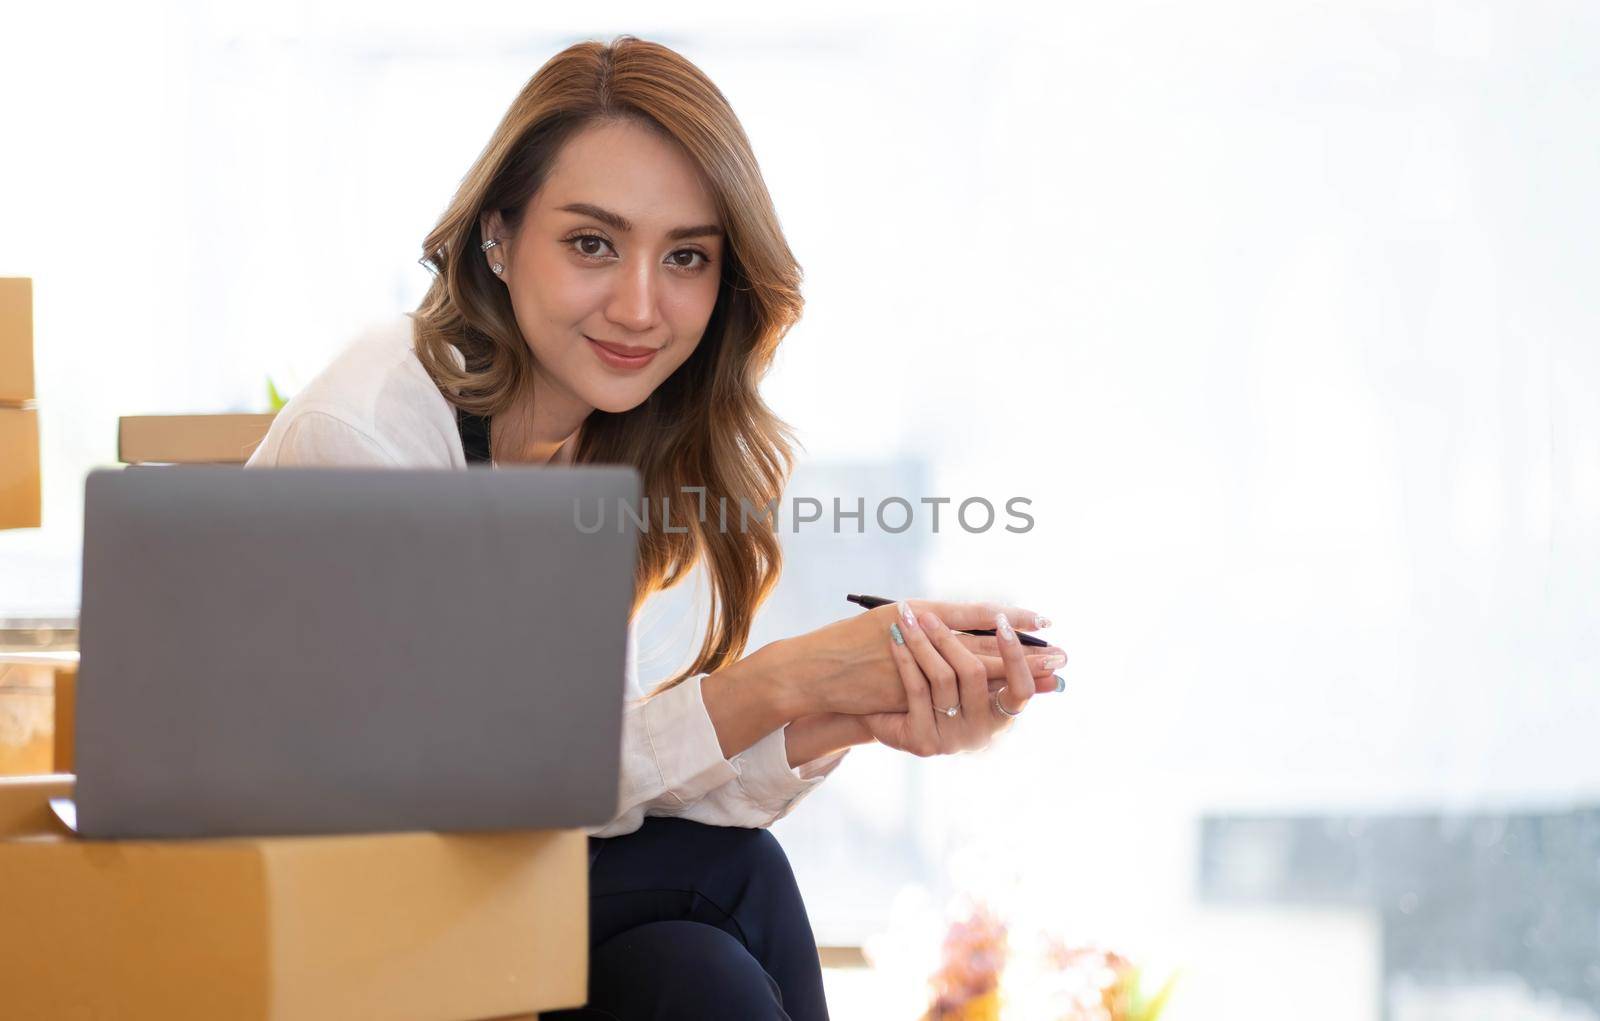 Portrait of Asian young woman SME working with a box at home the workplace.start-up small business owner, small business entrepreneur SME or freelance business online and delivery concept..